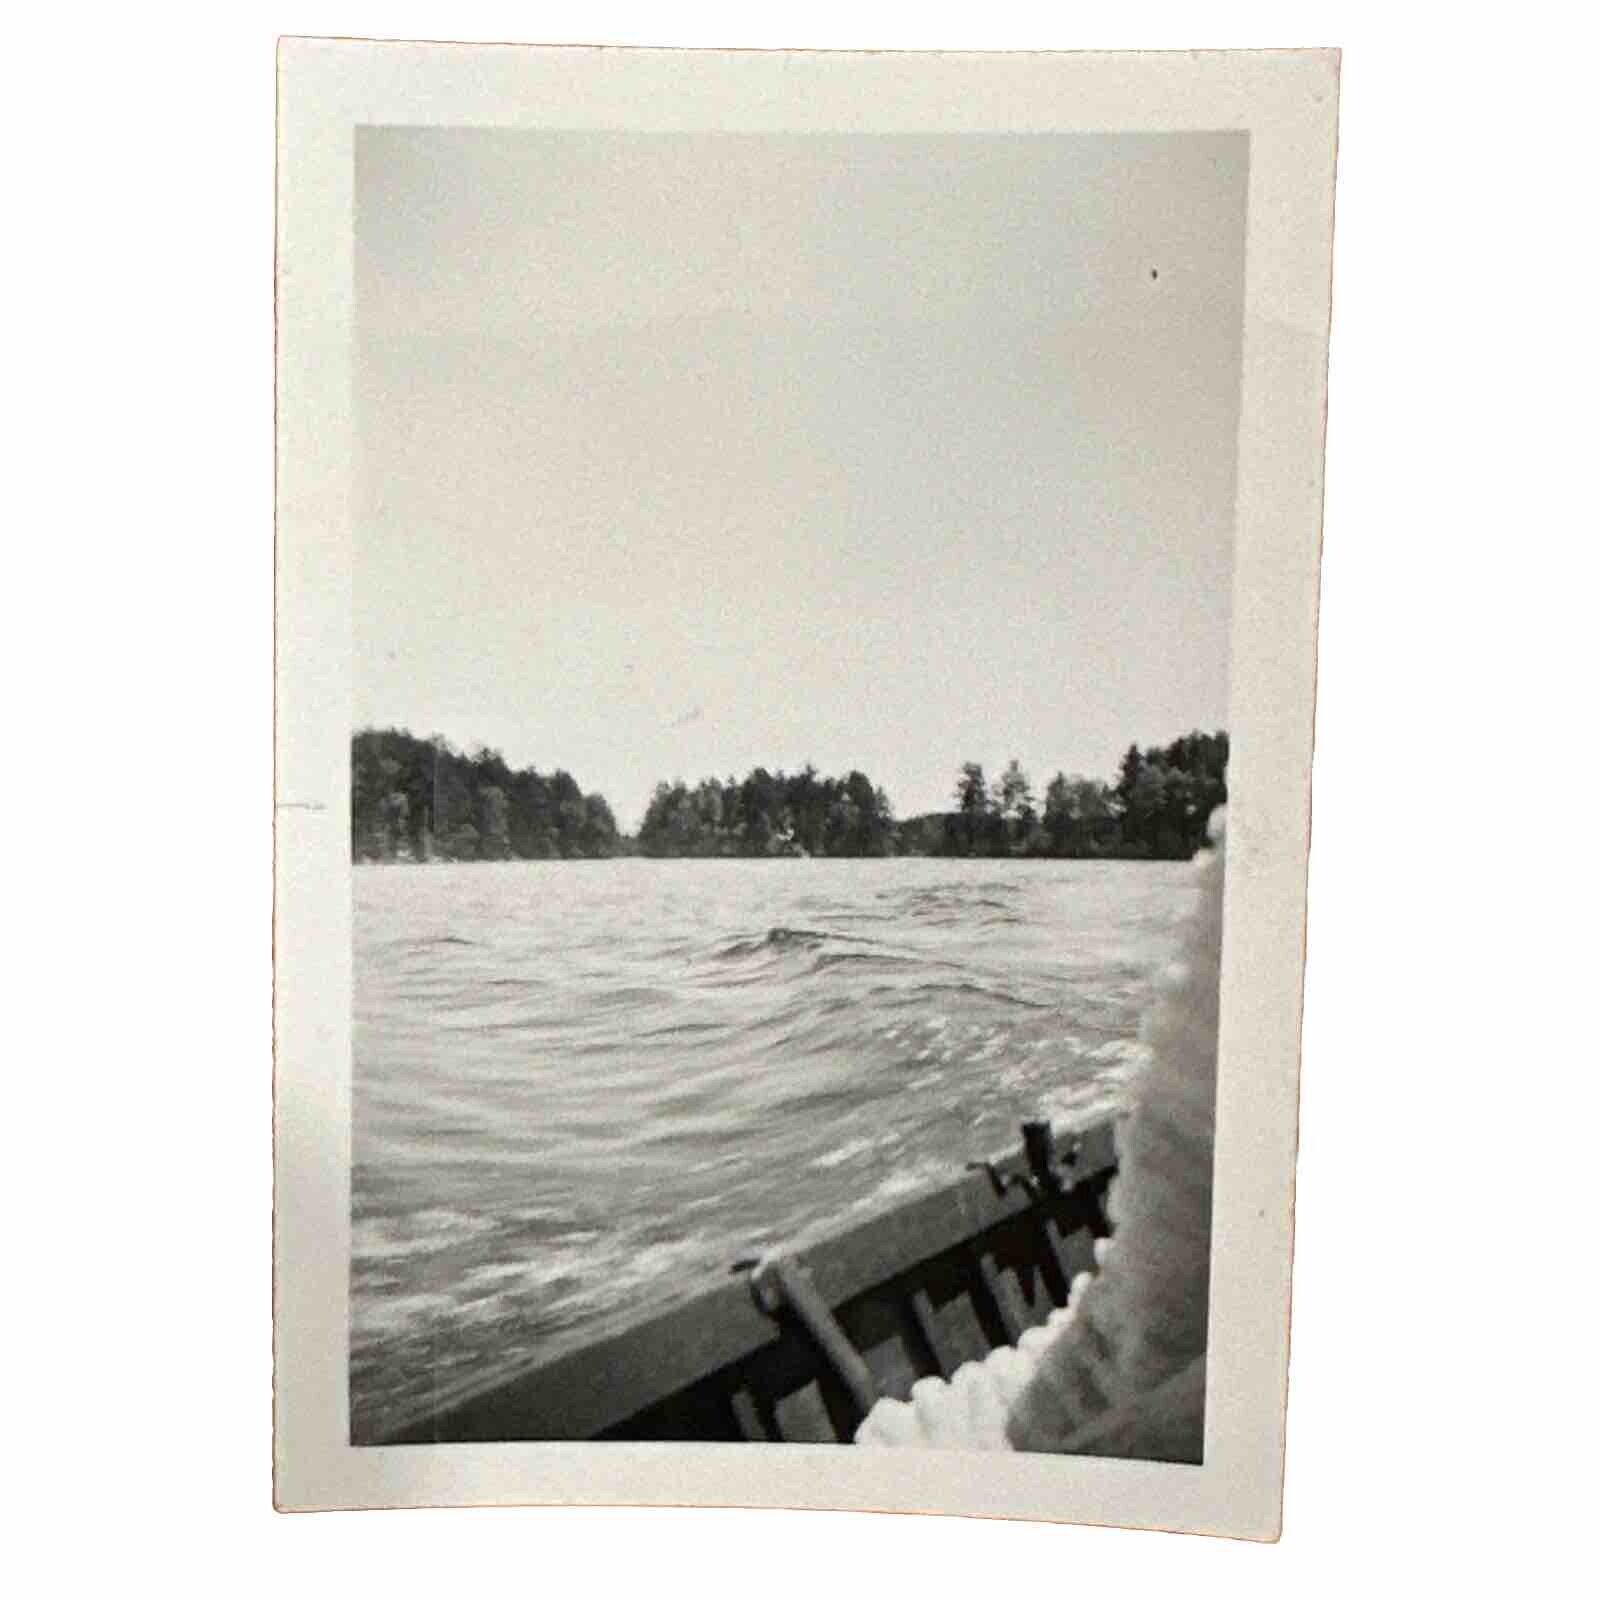 VINTAGE PHOTO looking out over water photographer out of frame Original Snapshot